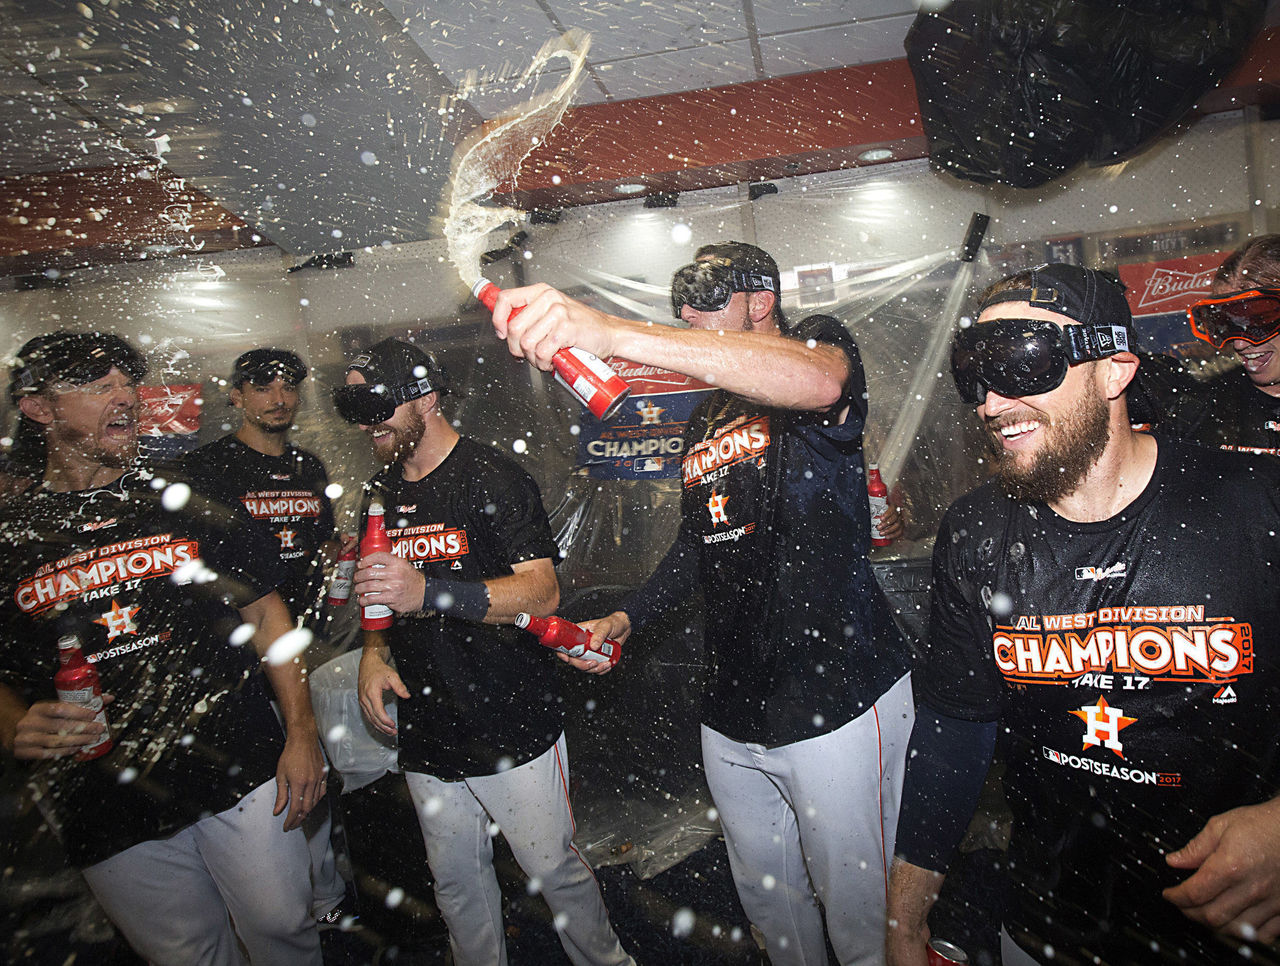 Photos of Astros' ALCS clubhous champagne celebration in New York